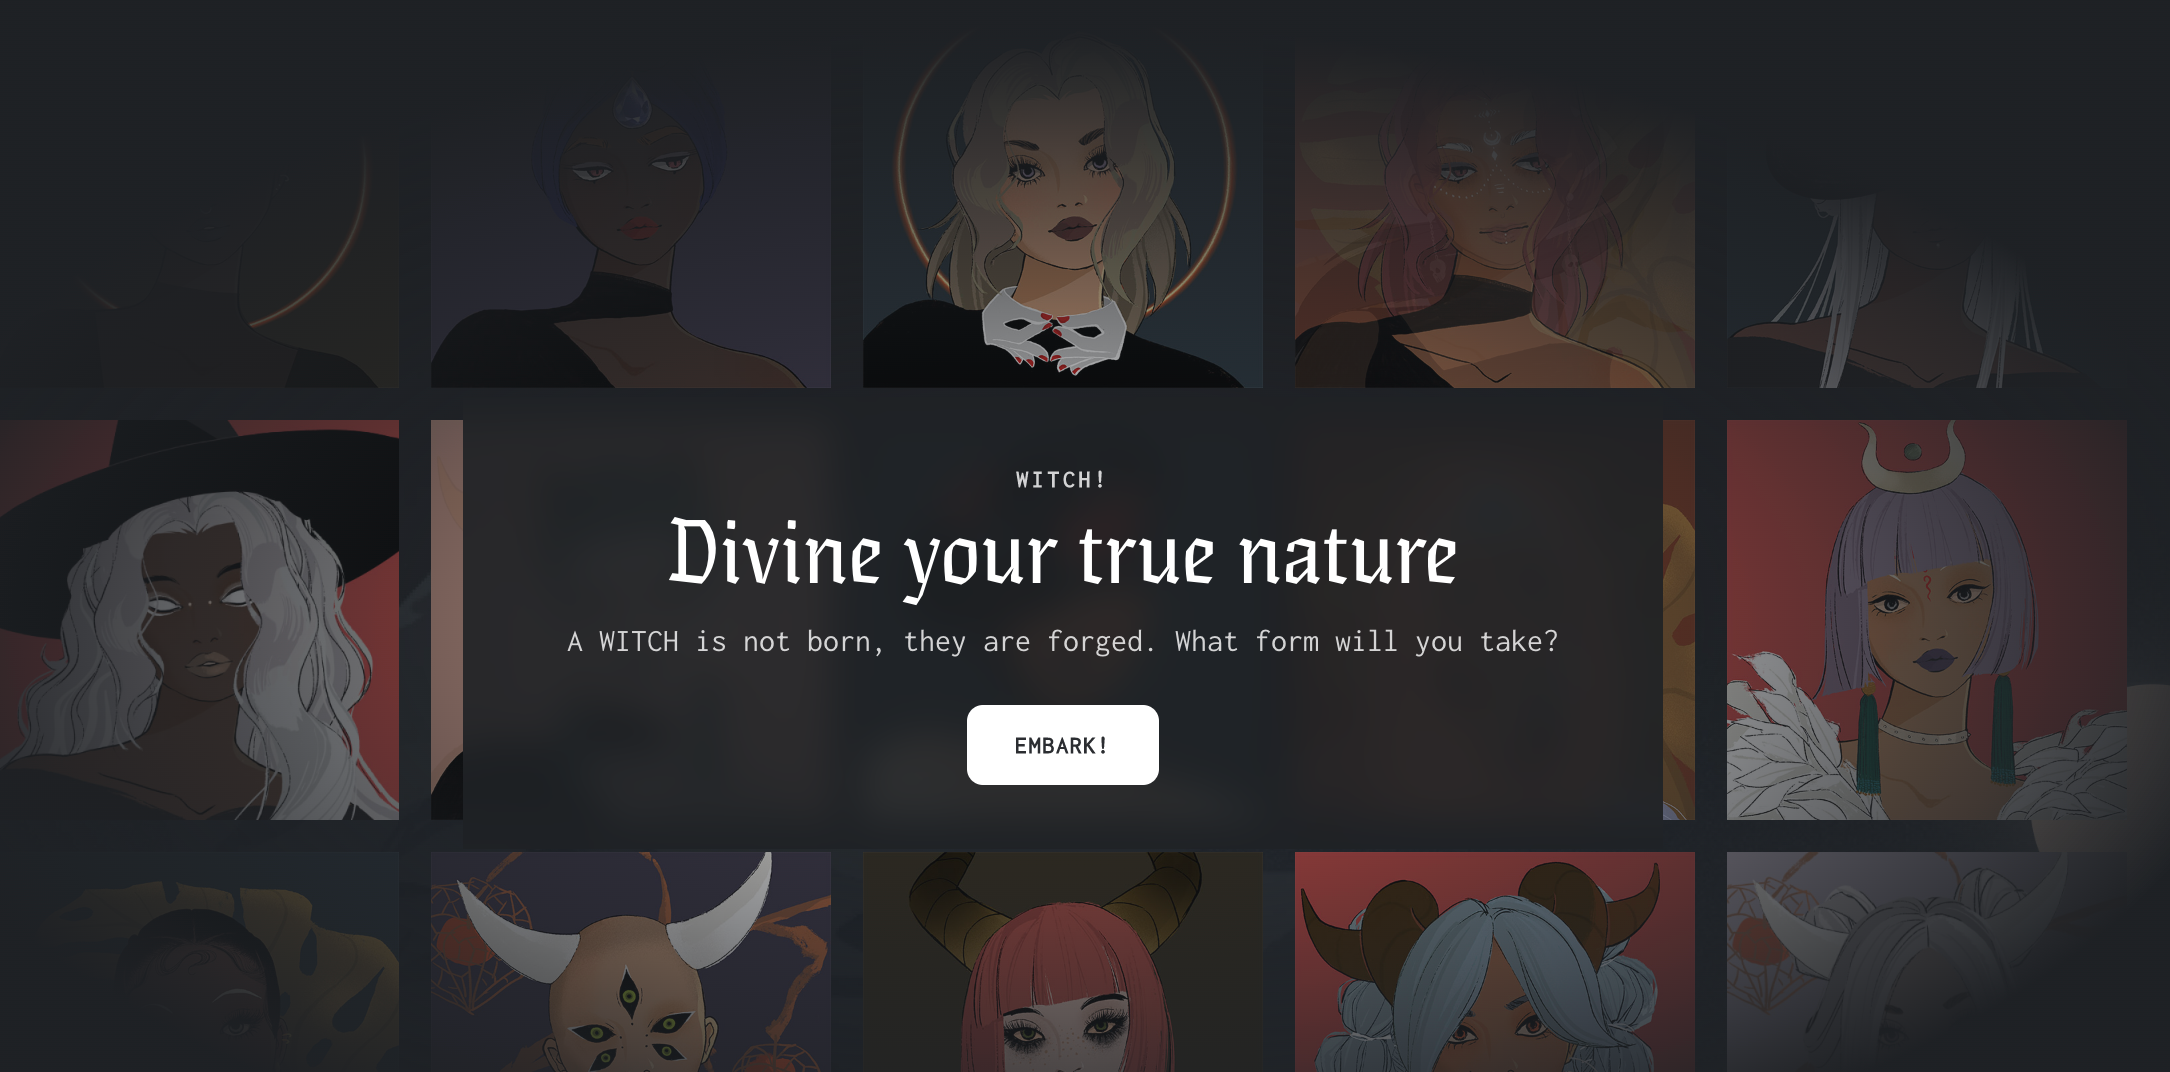 One example of the type of interactive content you can find on the Crypto Coven website, via: https://www.cryptocoven.xyz/divination